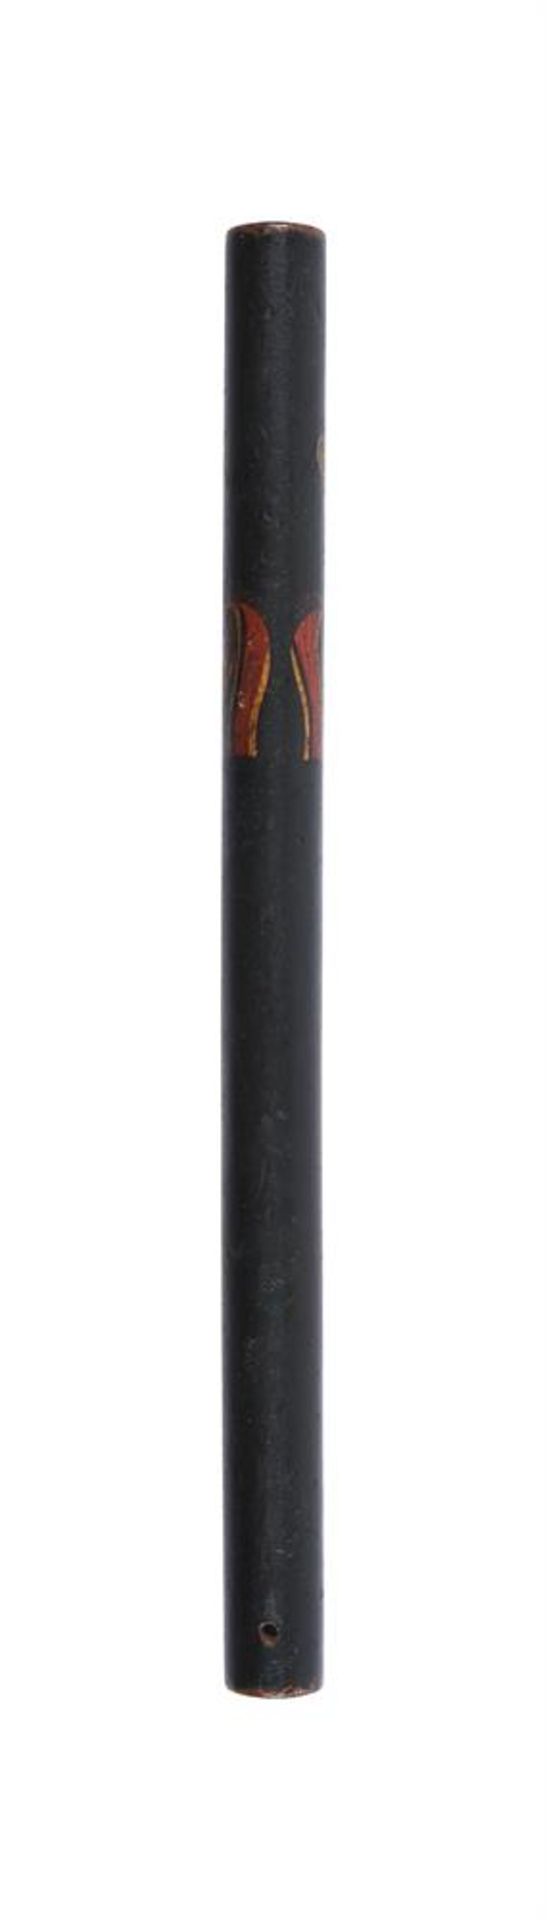 A GEORGE IV GREEN PAINTED WOOD TRUNCHEON - Image 2 of 2